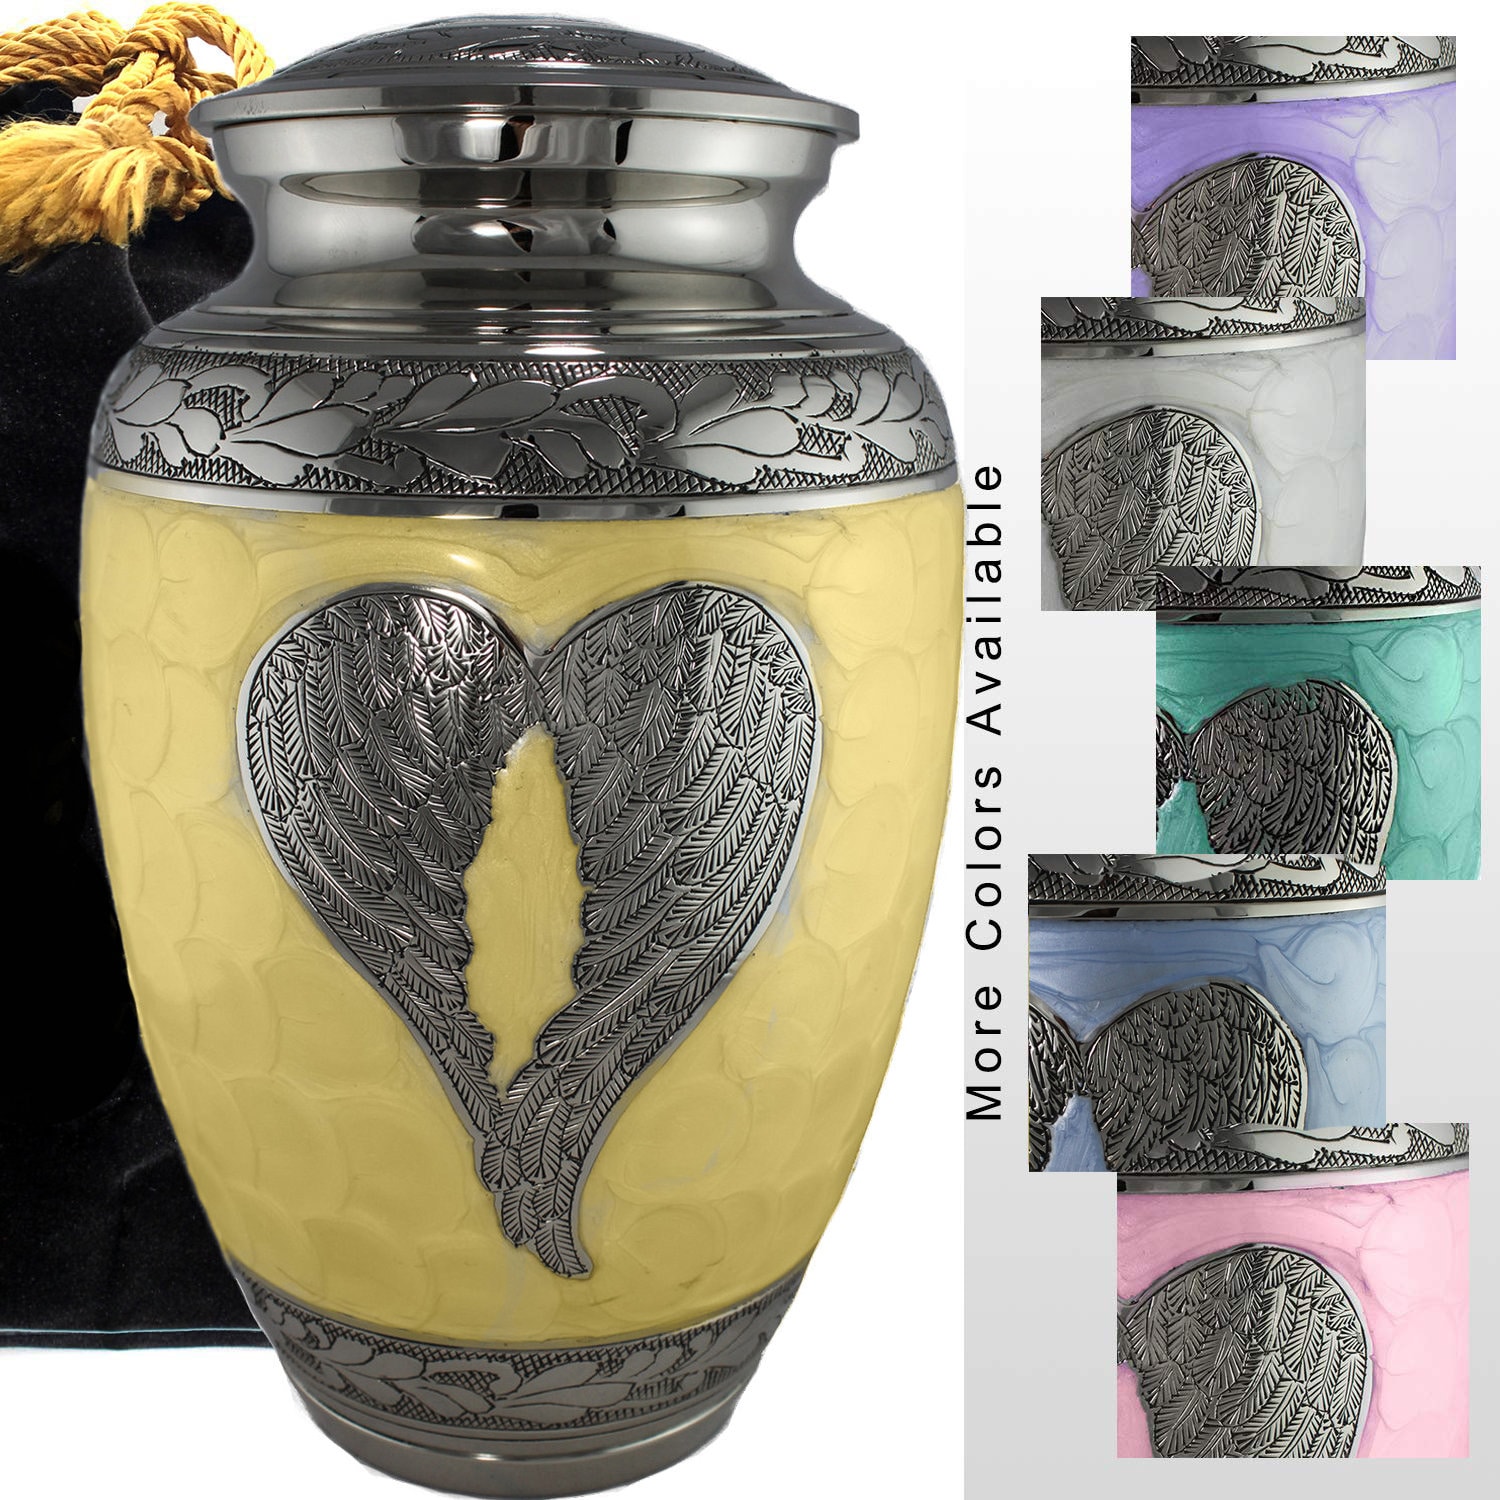  Gone Large Cremation Fishing Urns for Human Ashes Adult Male  Female - 200 Lbs Decorative Men Urn Fishing, Urns for Dad, Men, Human  Ashes